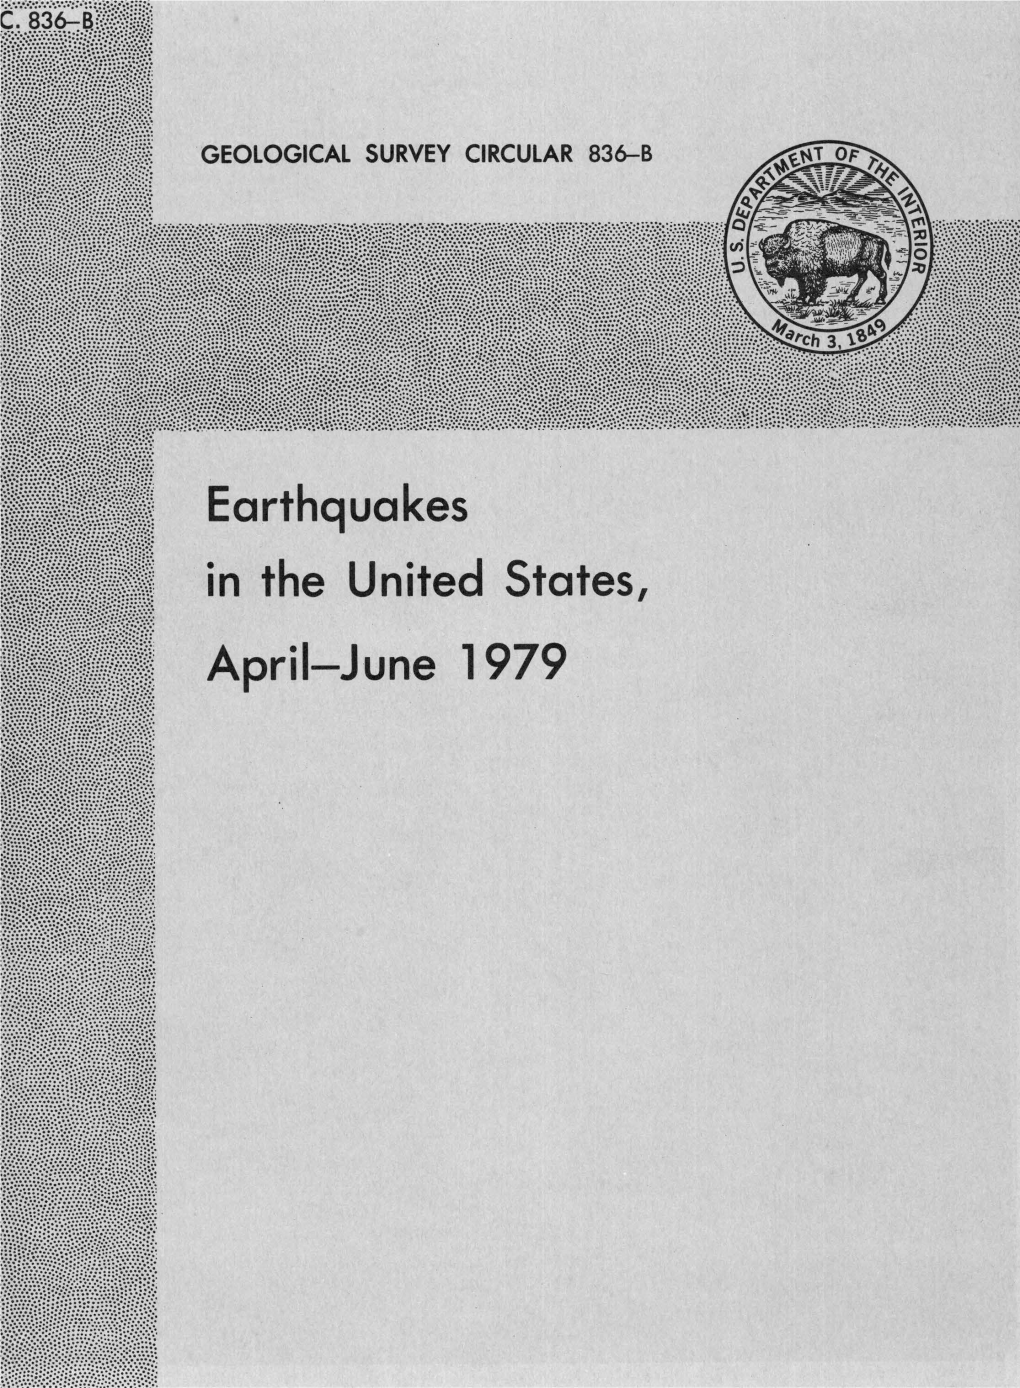 Earthquakes in the United States, April-June 1979